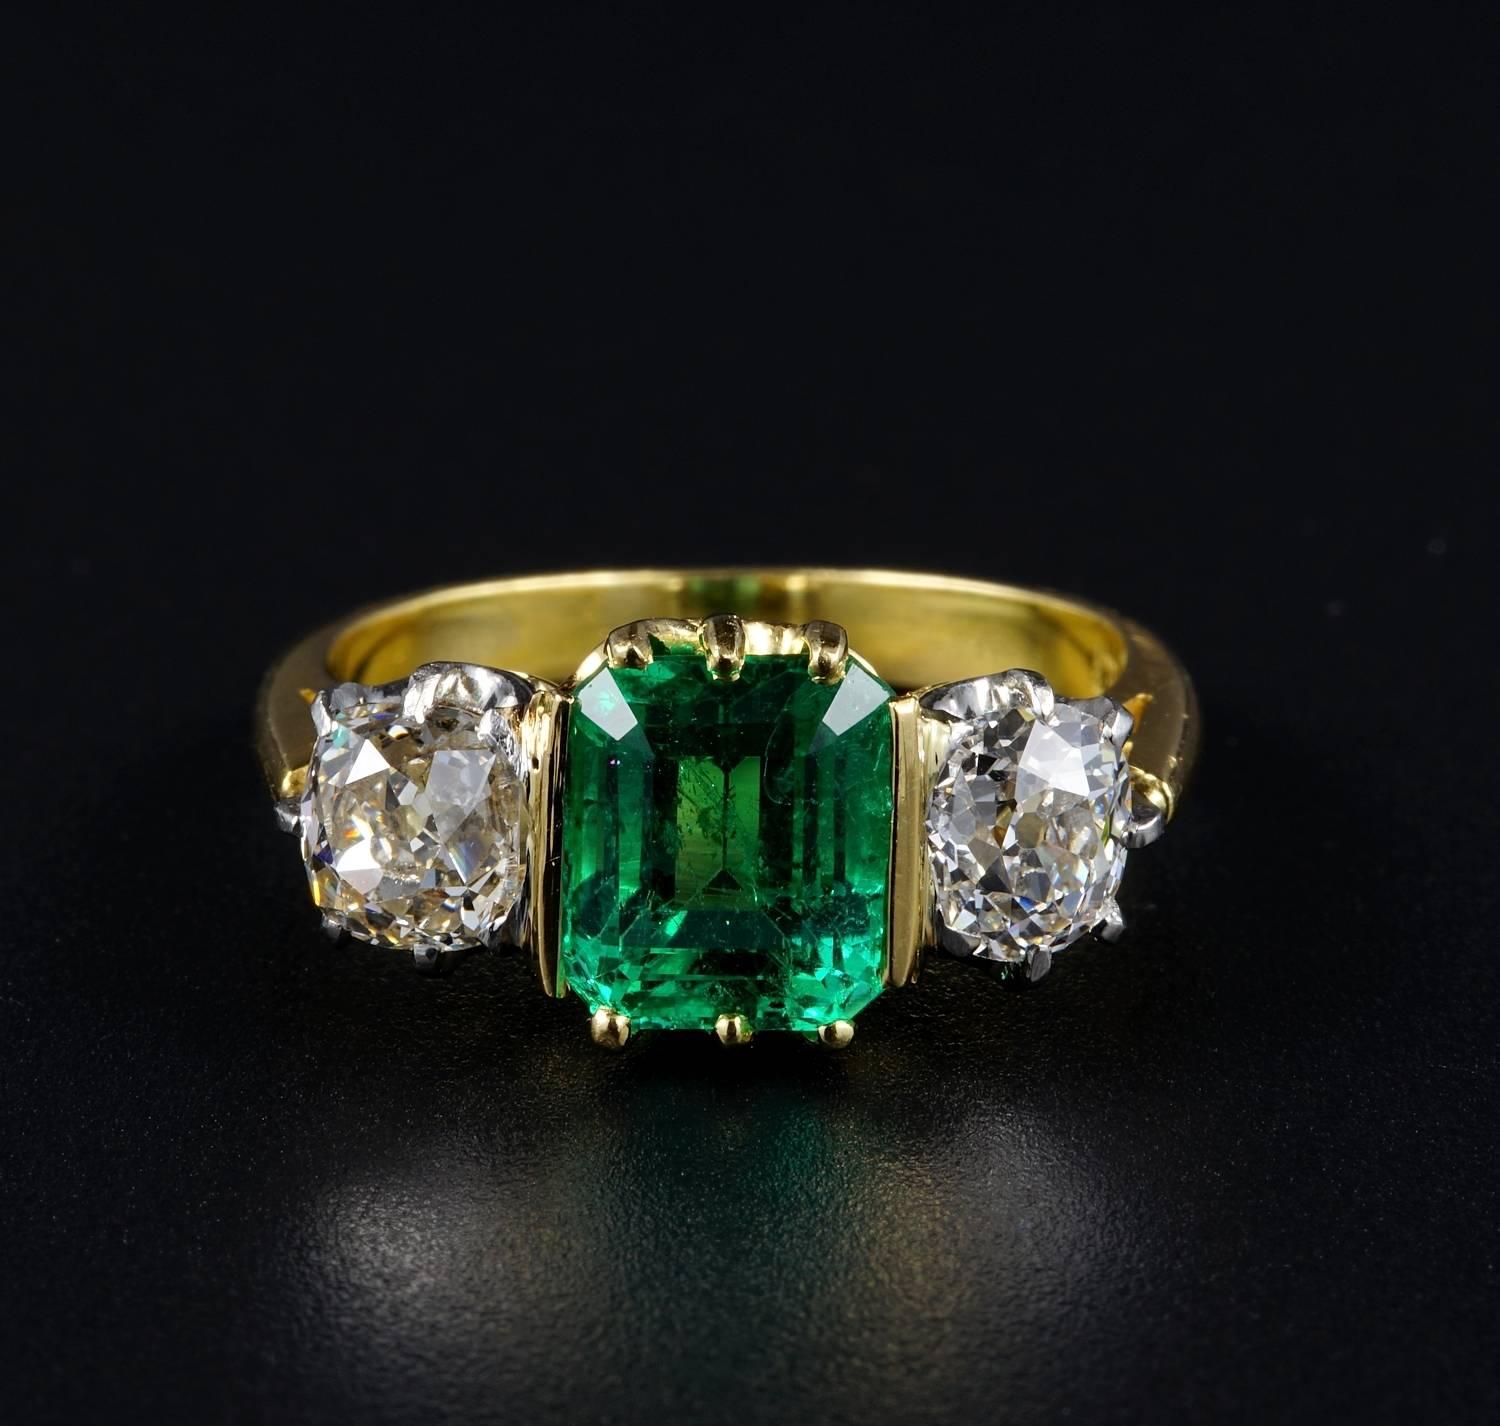 a superb version of traditional trilogy Victorian ring
exquisitely crafted during 1900 of solid 18 KT gold and platinum, marked
Set with a centre natural Emerald Colombian origin
prizing rich, intense,vibrant green, good colour saturation, great